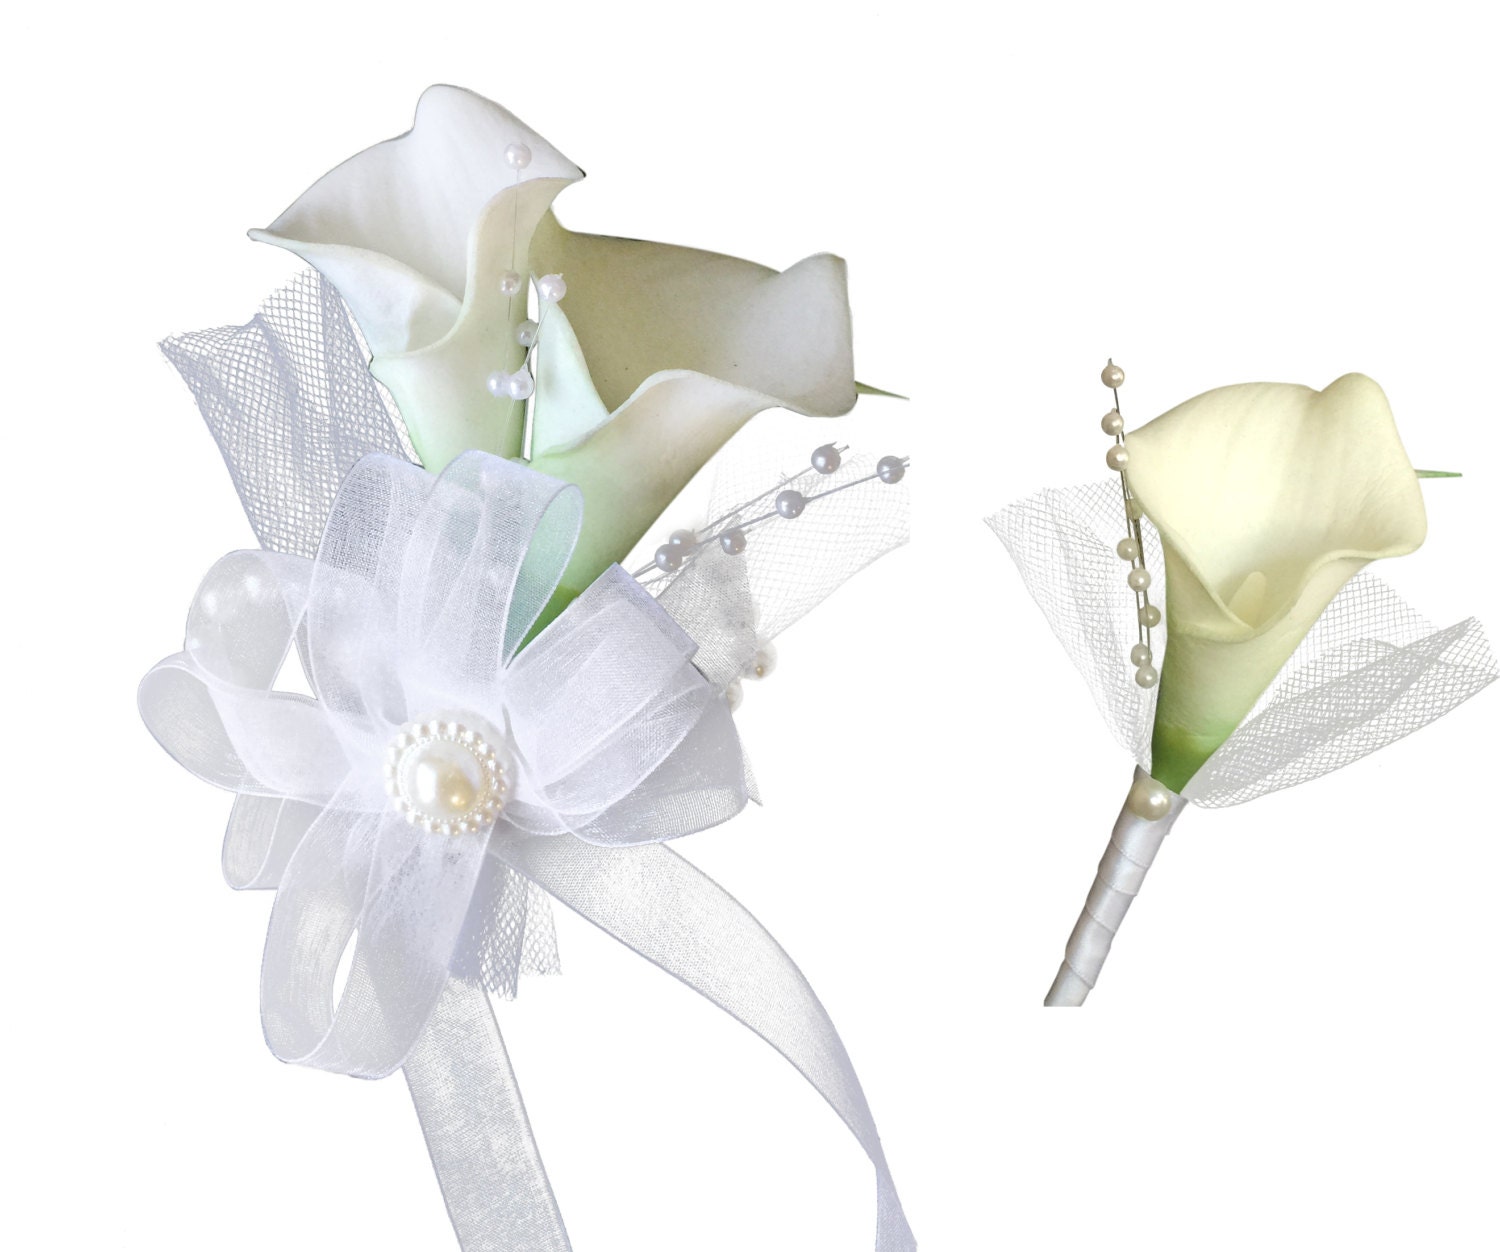 2PCS Wrist Corsage And Boutonniere Set Mini Lilies Many colors to pick from 